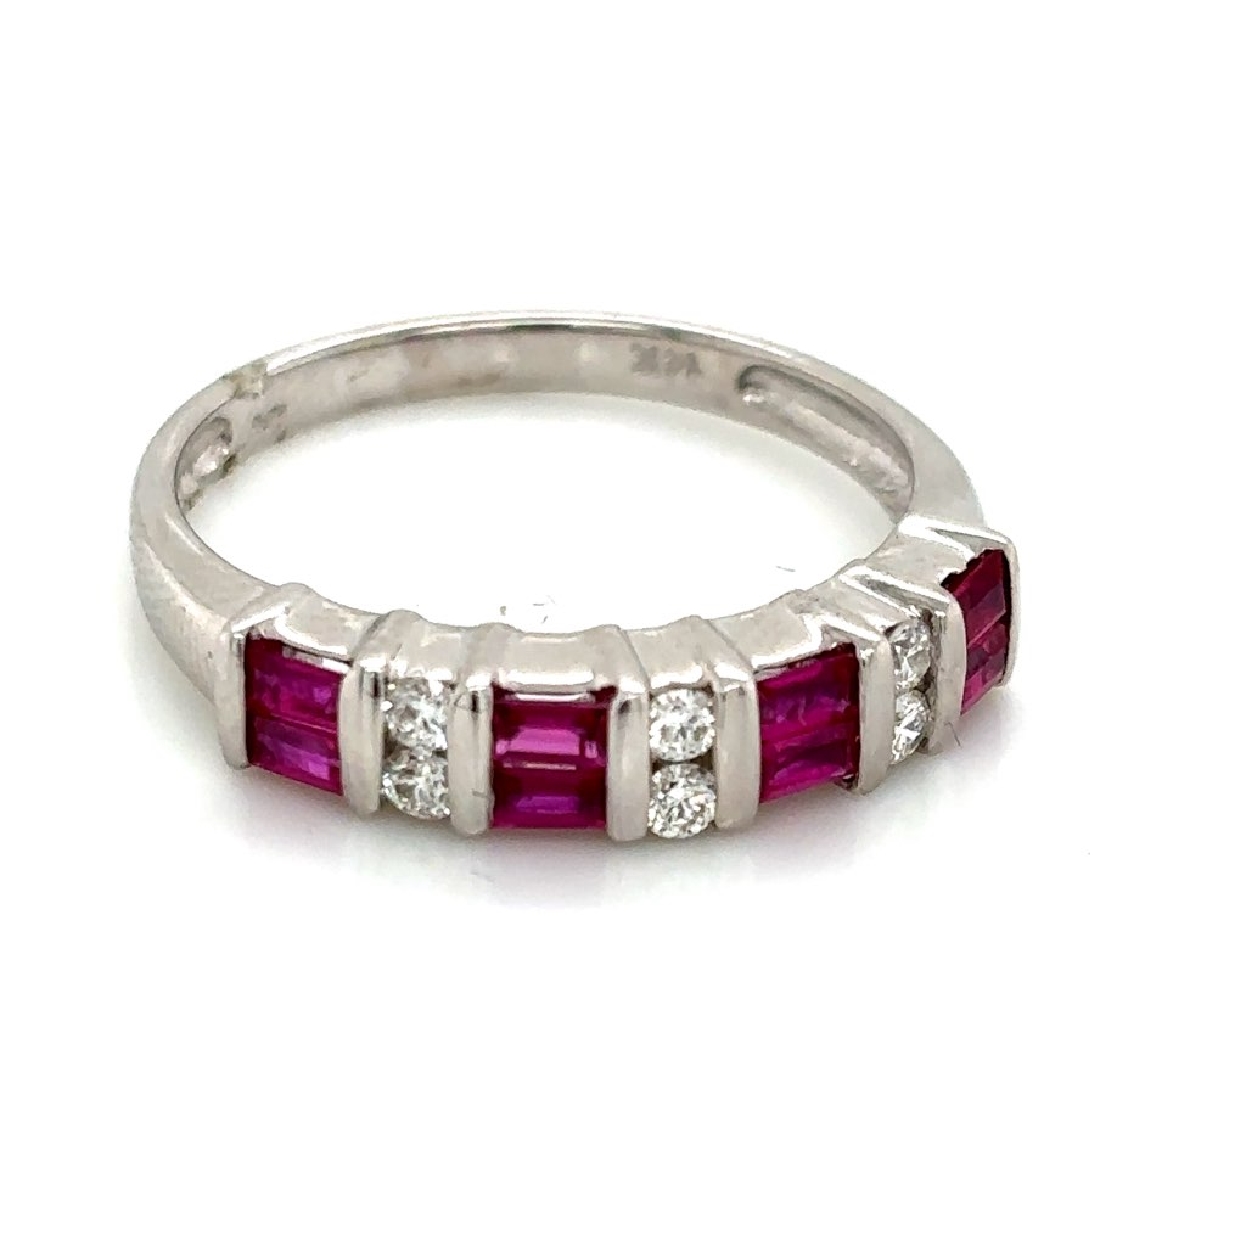 14K White Gold Ring with Two Rows of Rubies .60CT and Diamonds .16CT 

Size 7.25